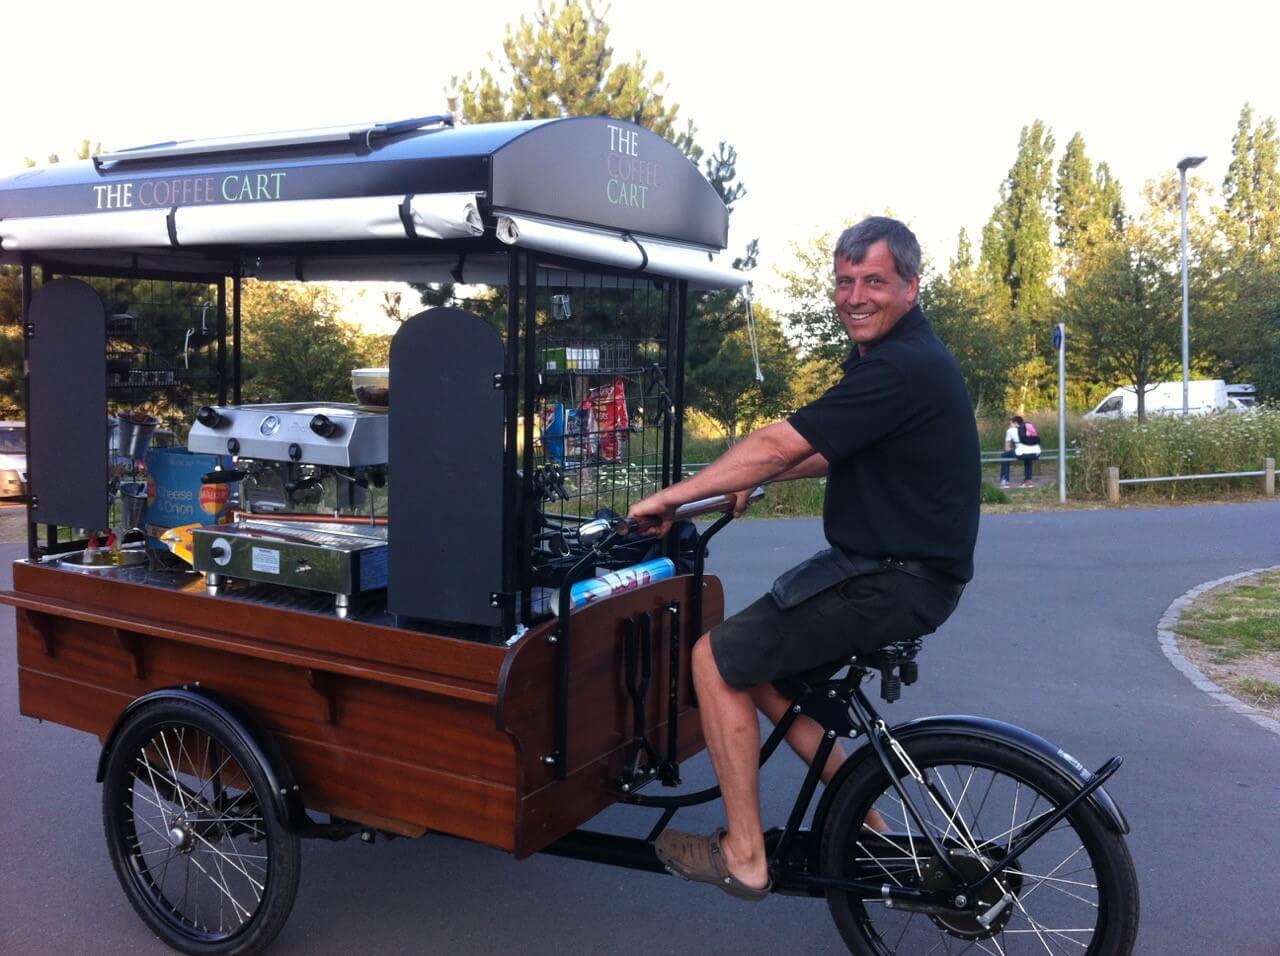 man riding on the coffee cart